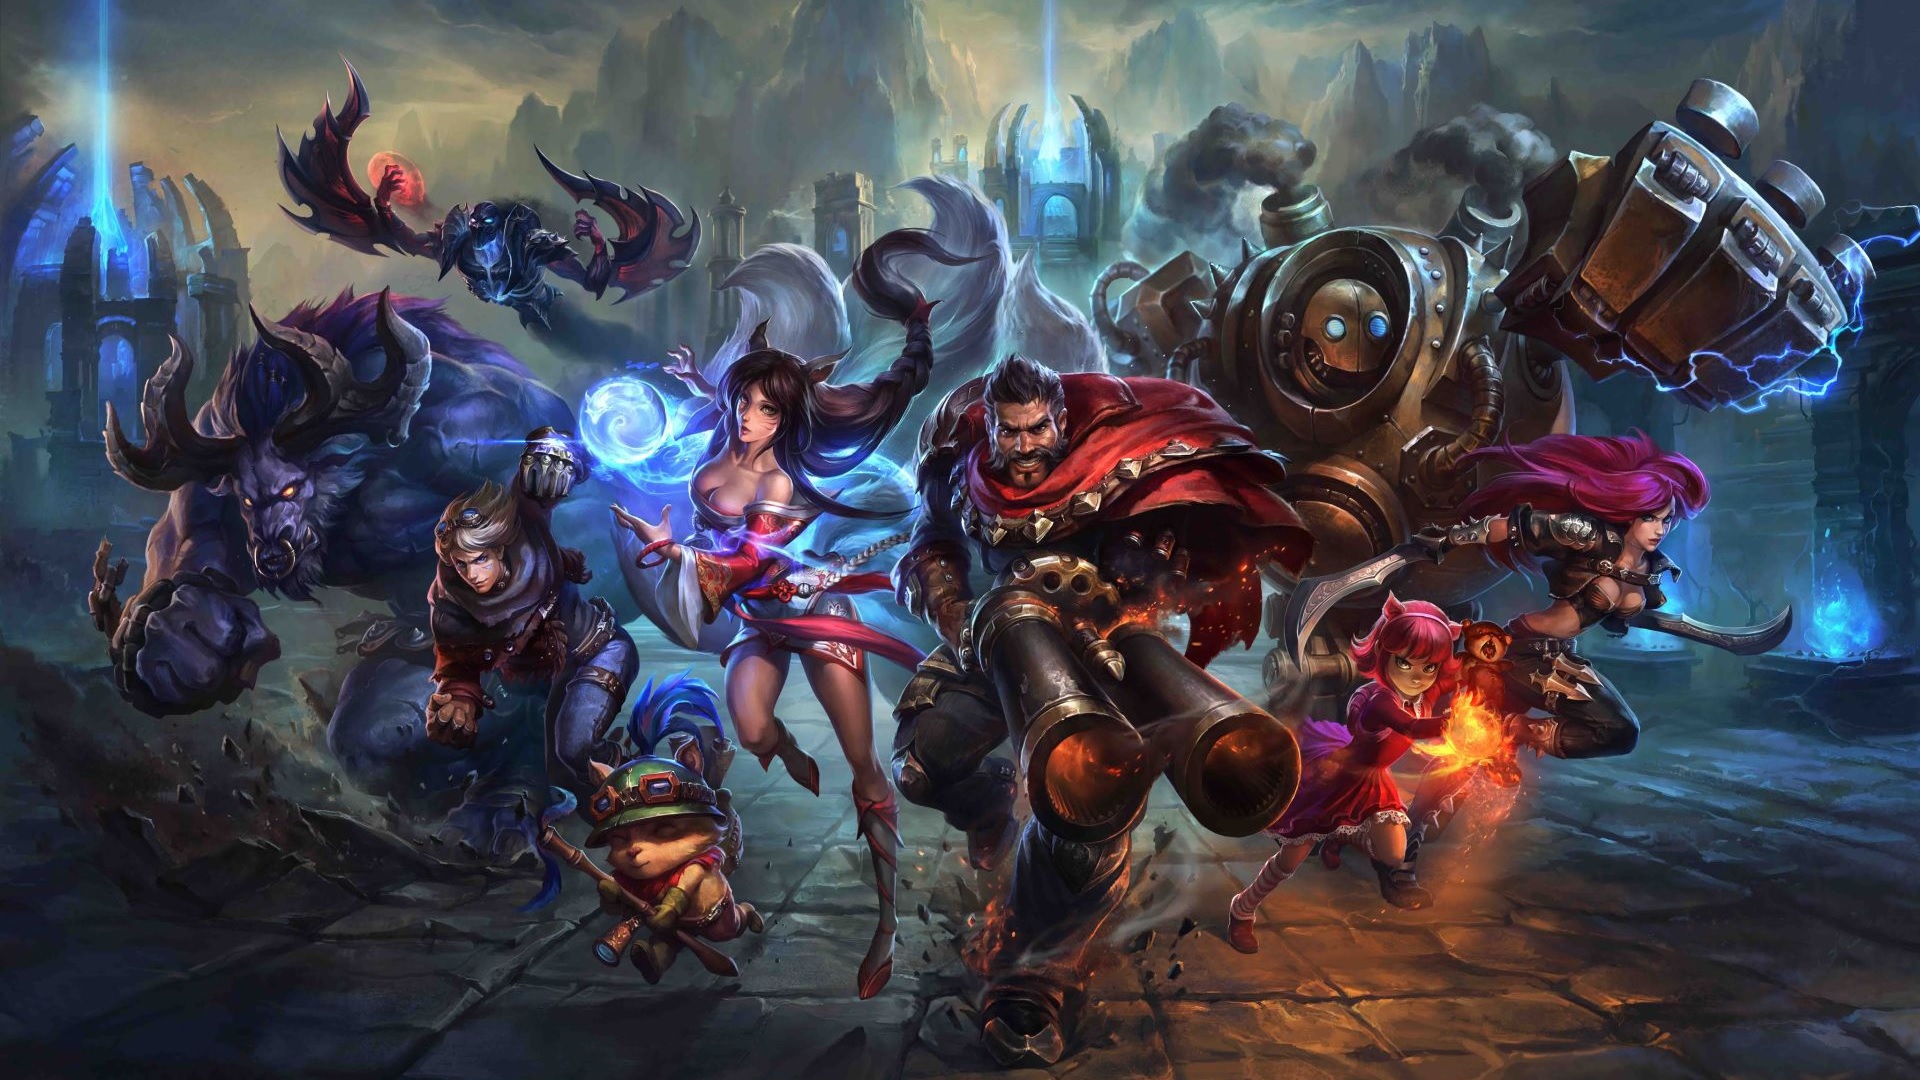 League Of Legends joins Auto Chess craze with Teamfight Tactics